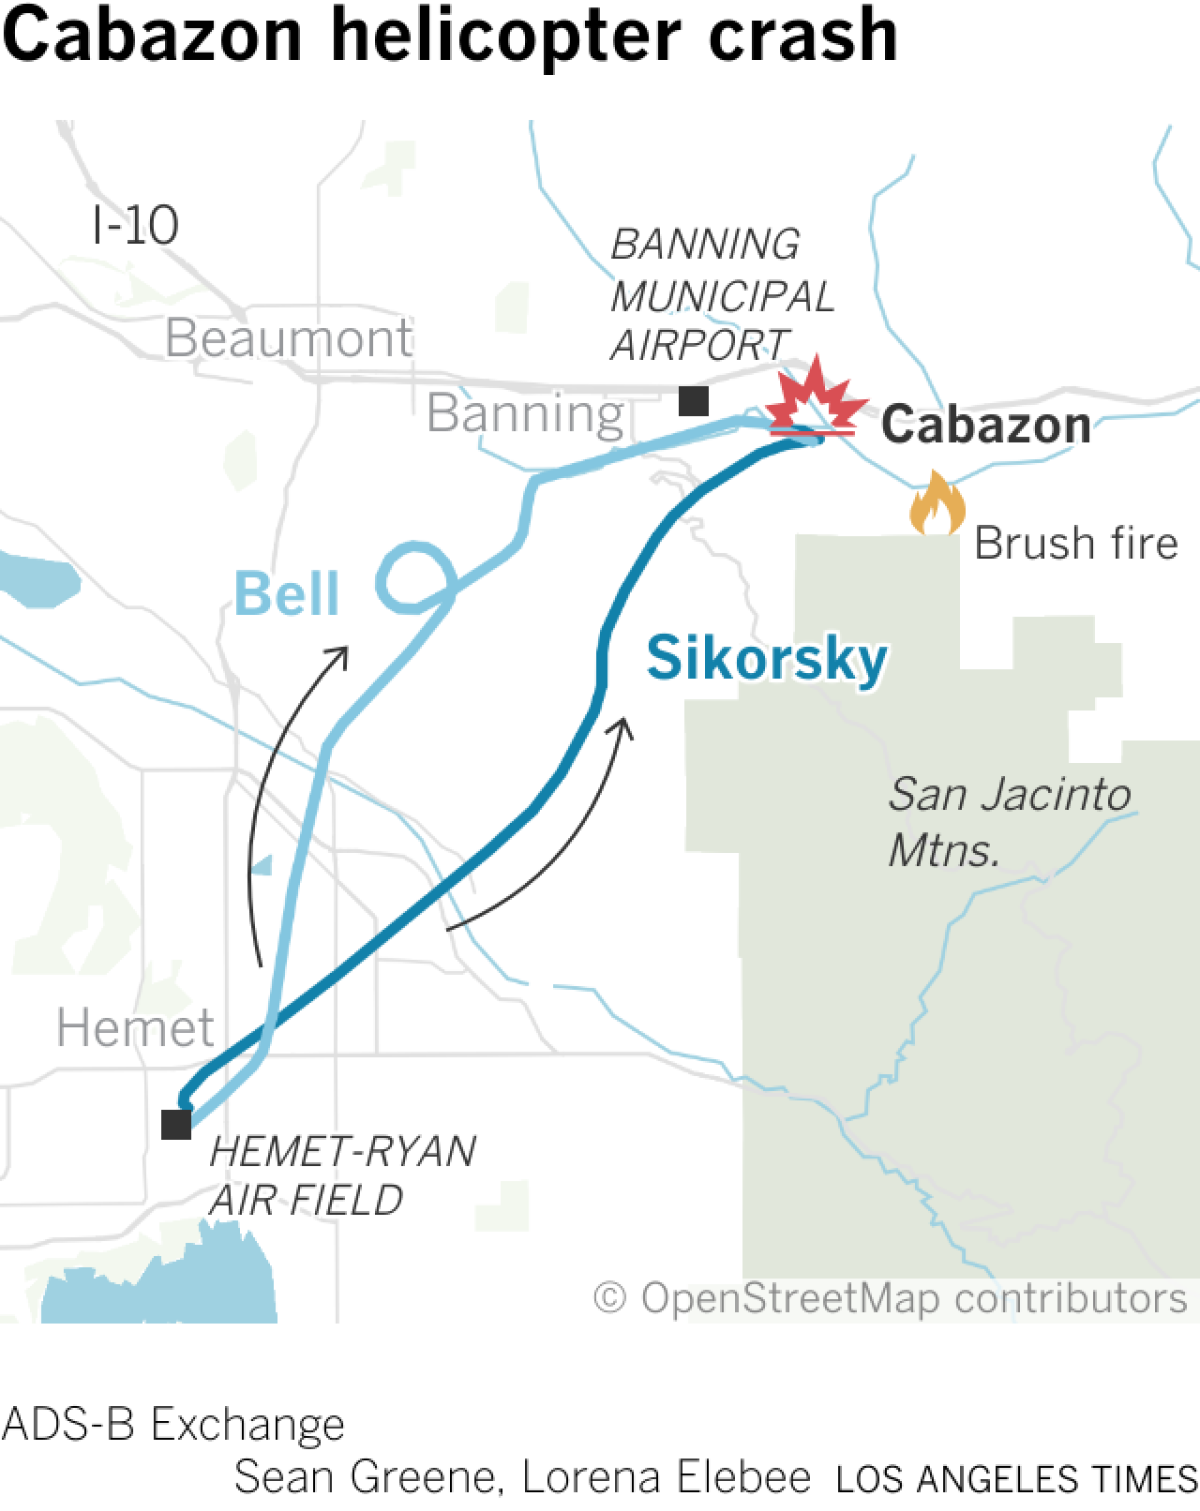 Map shows the flight paths of two helicopters that crashed over Cabazon, Calif.